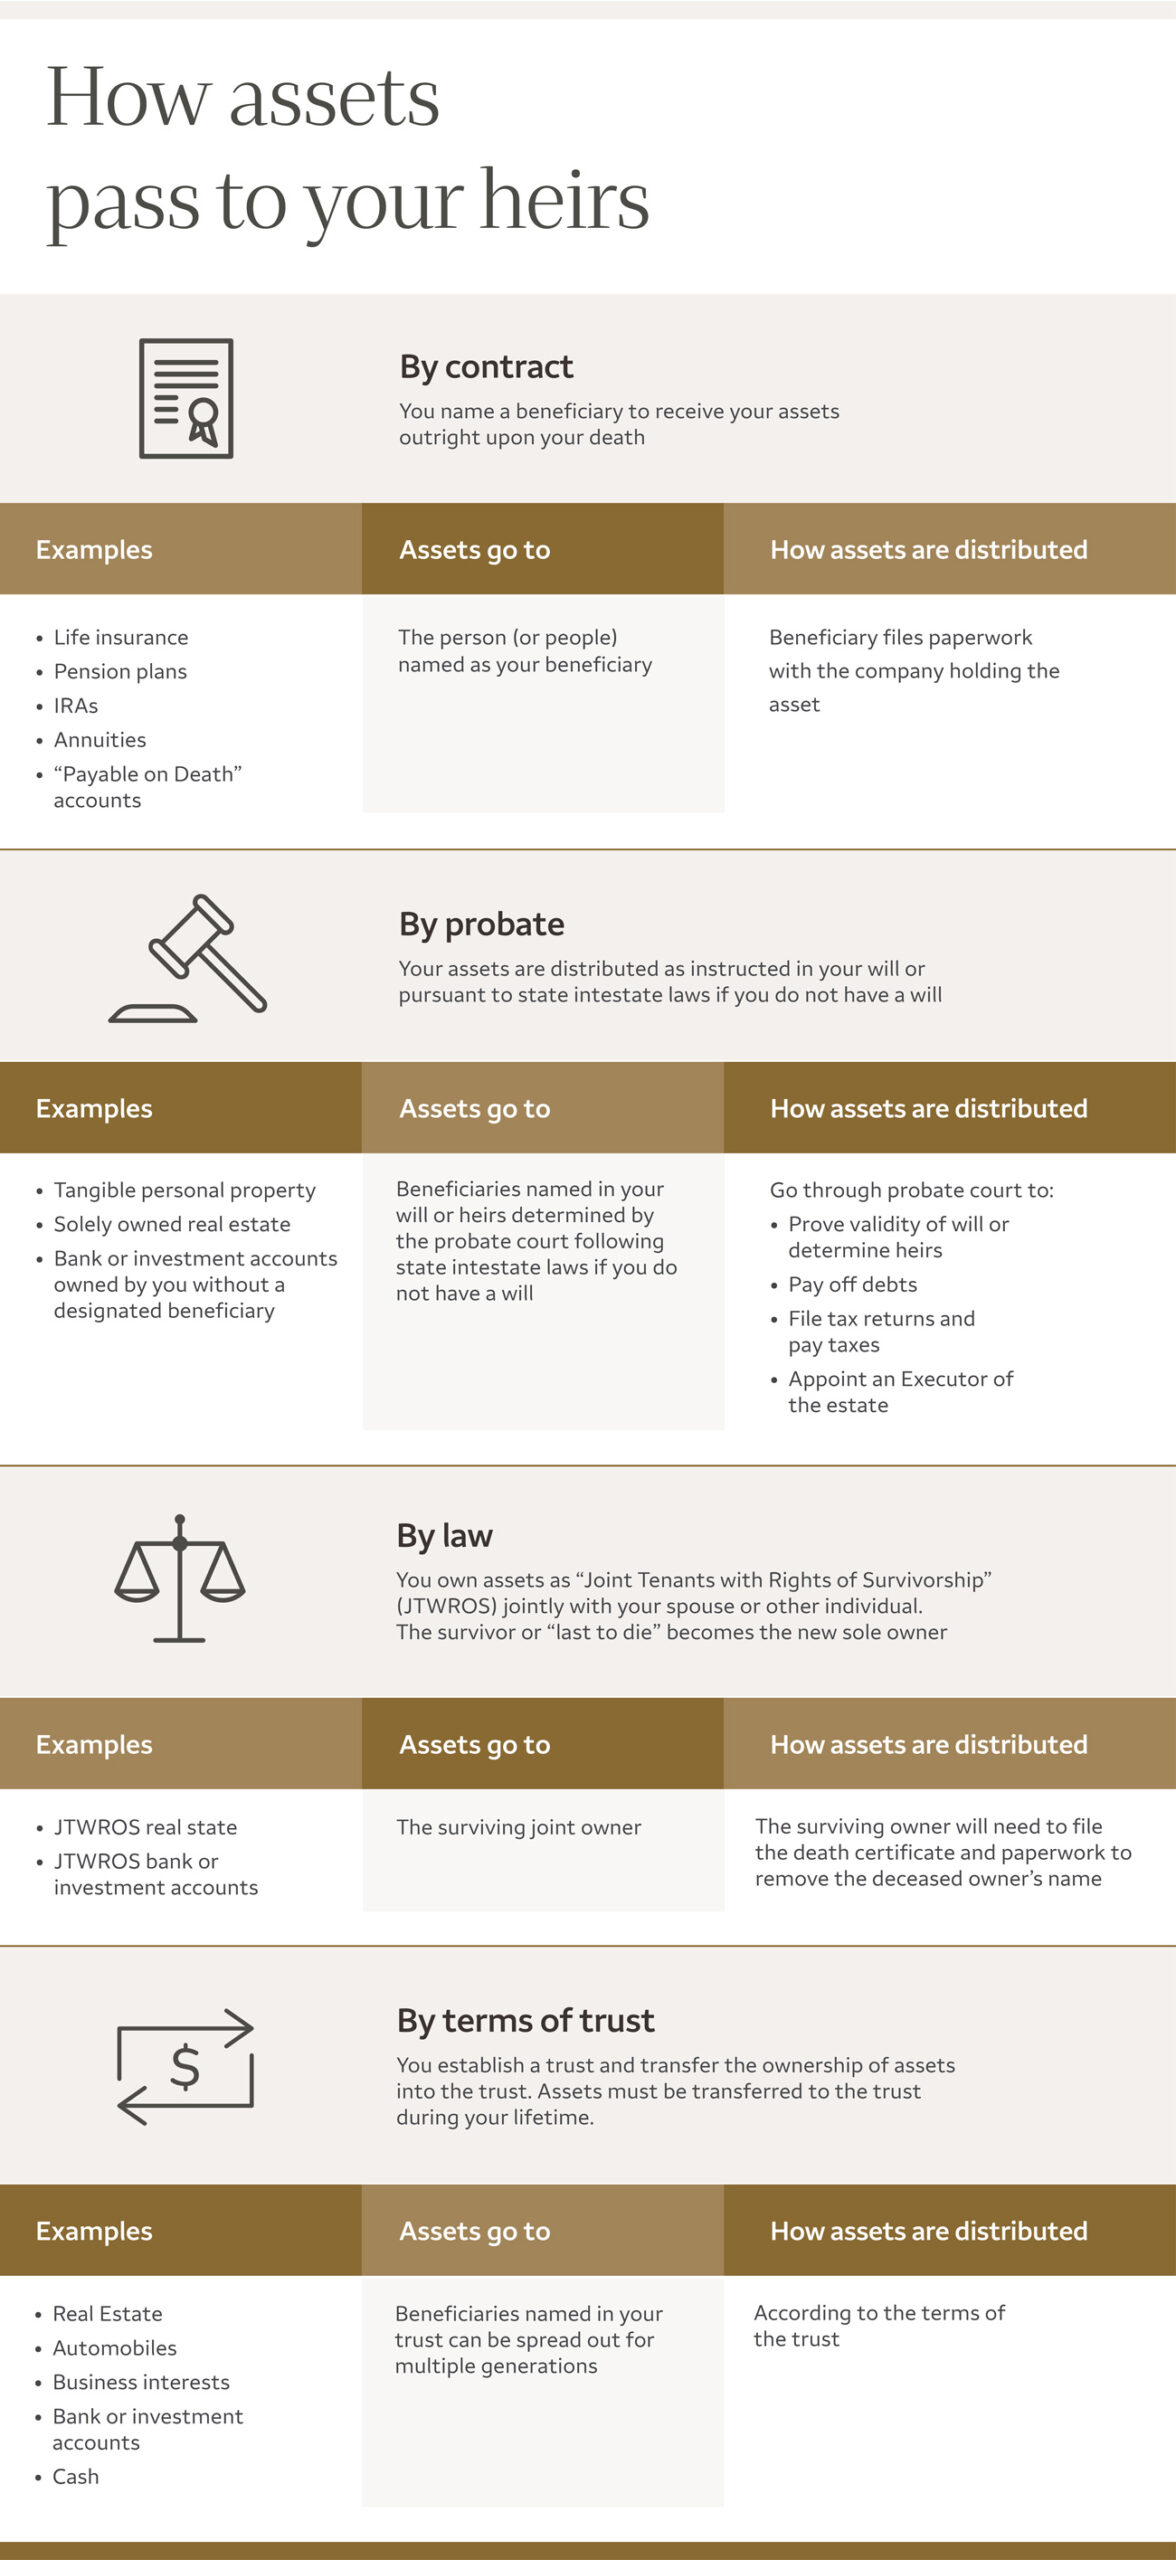 Infographic showing the four ways that assets pass to a person’s heirs. For details, click "view text alternative."